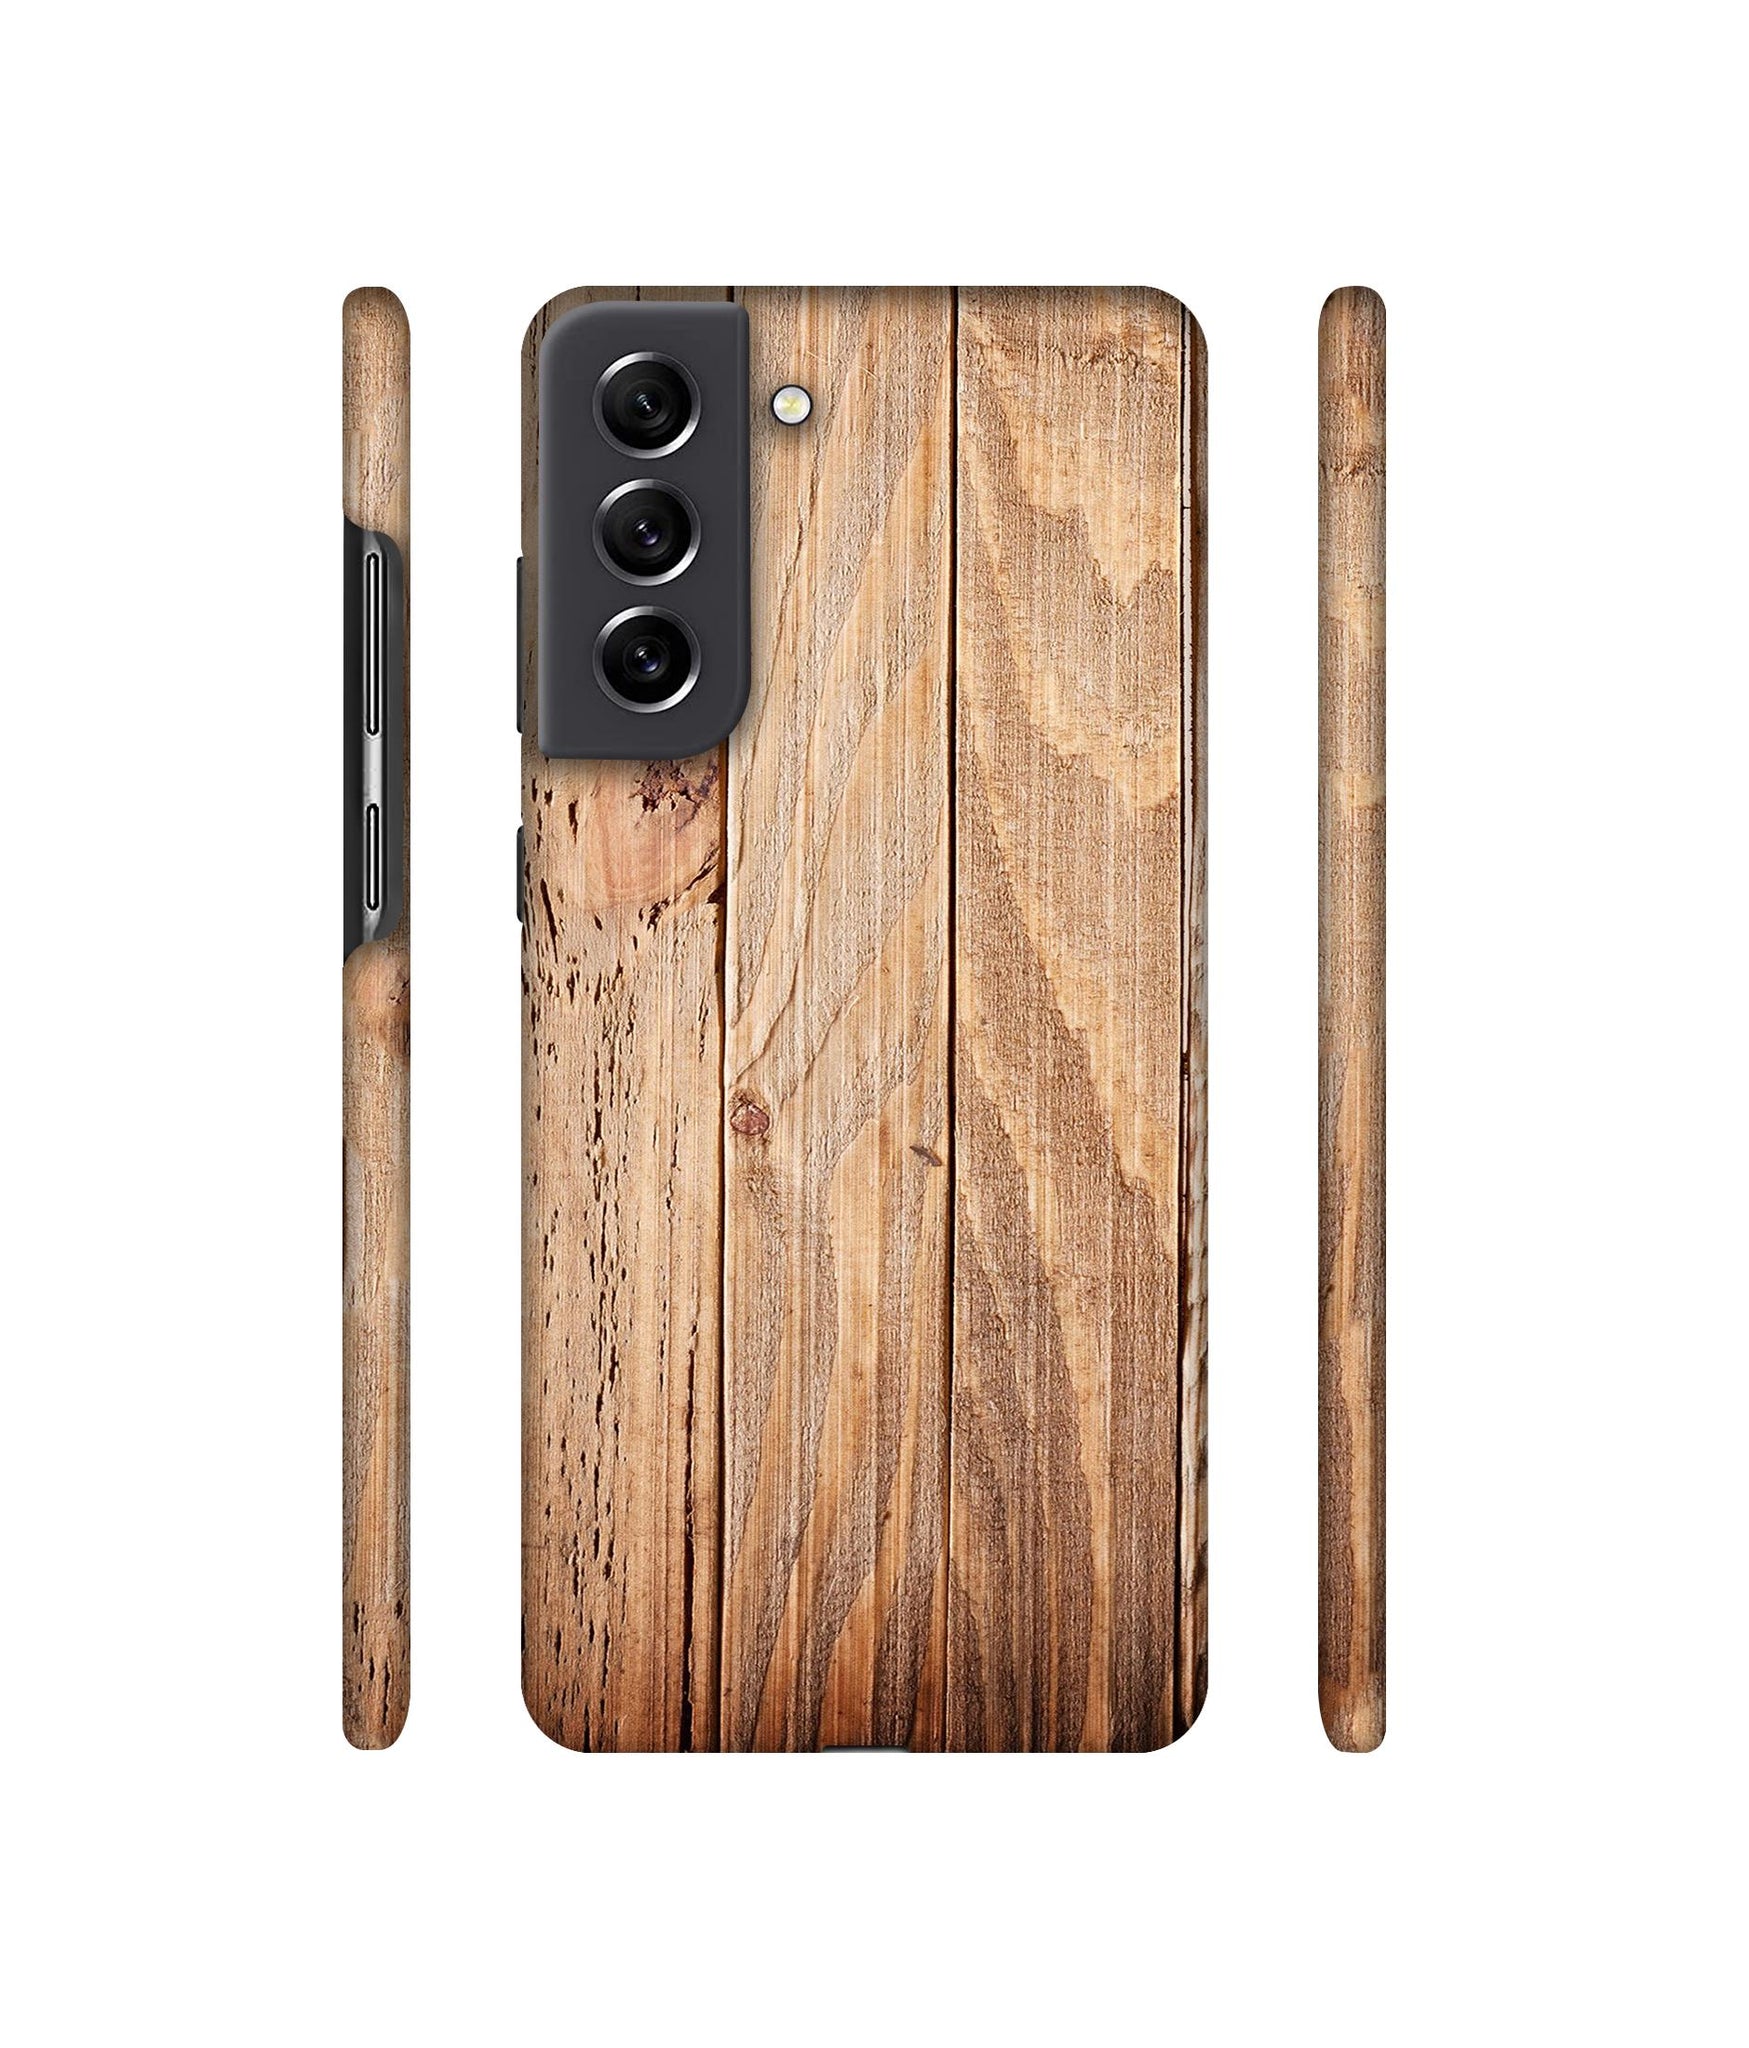 Wooden Texture Designer Hard Back Cover for Samsung Galaxy S21 FE 5G